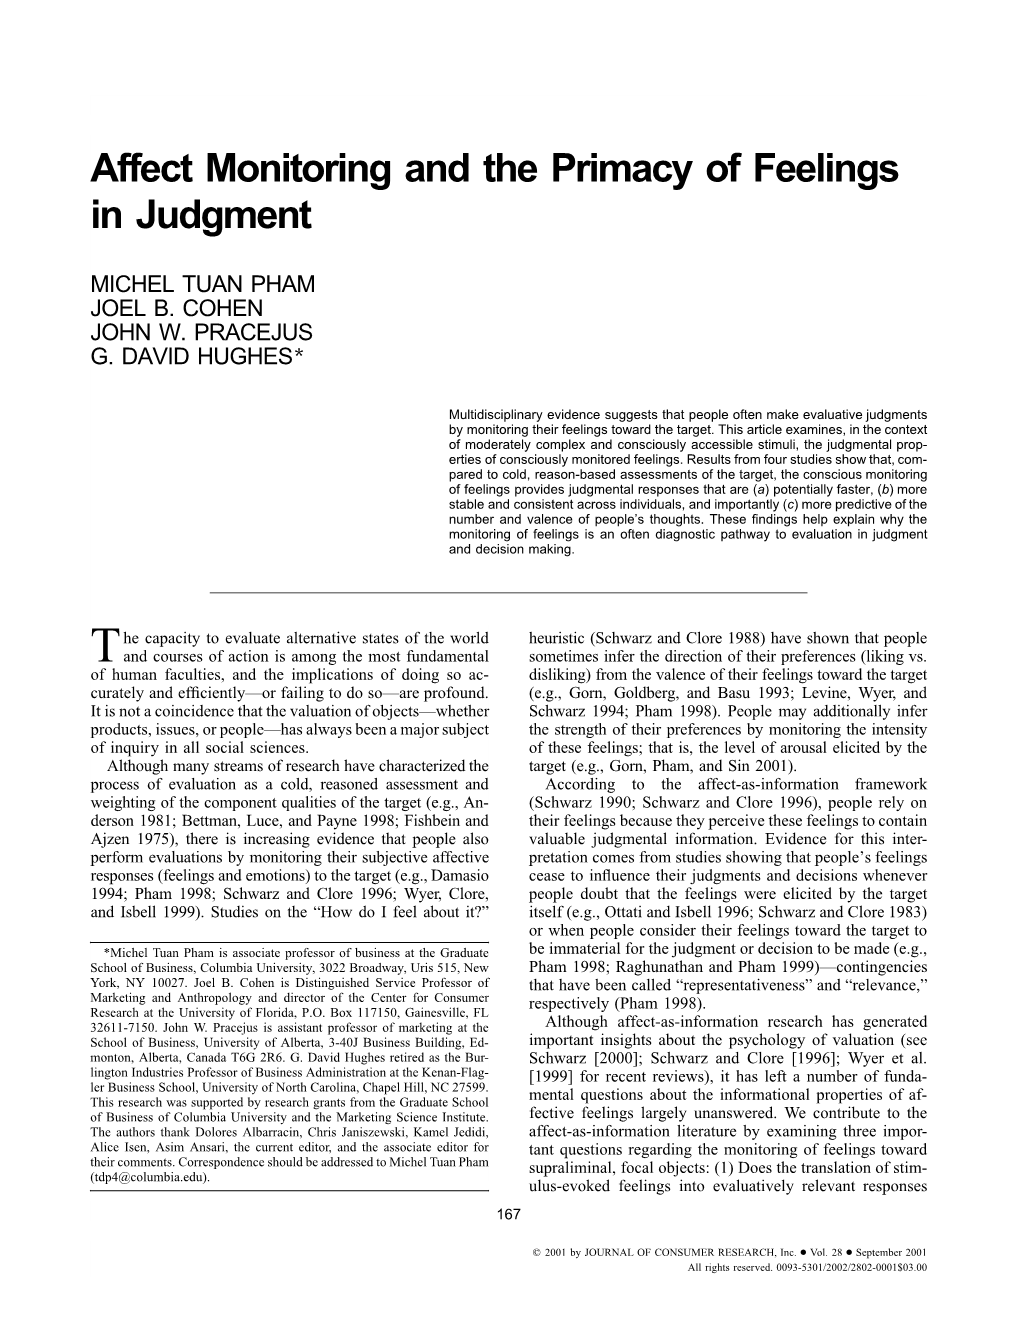 Affect Monitoring and the Primacy of Feelings in Judgment